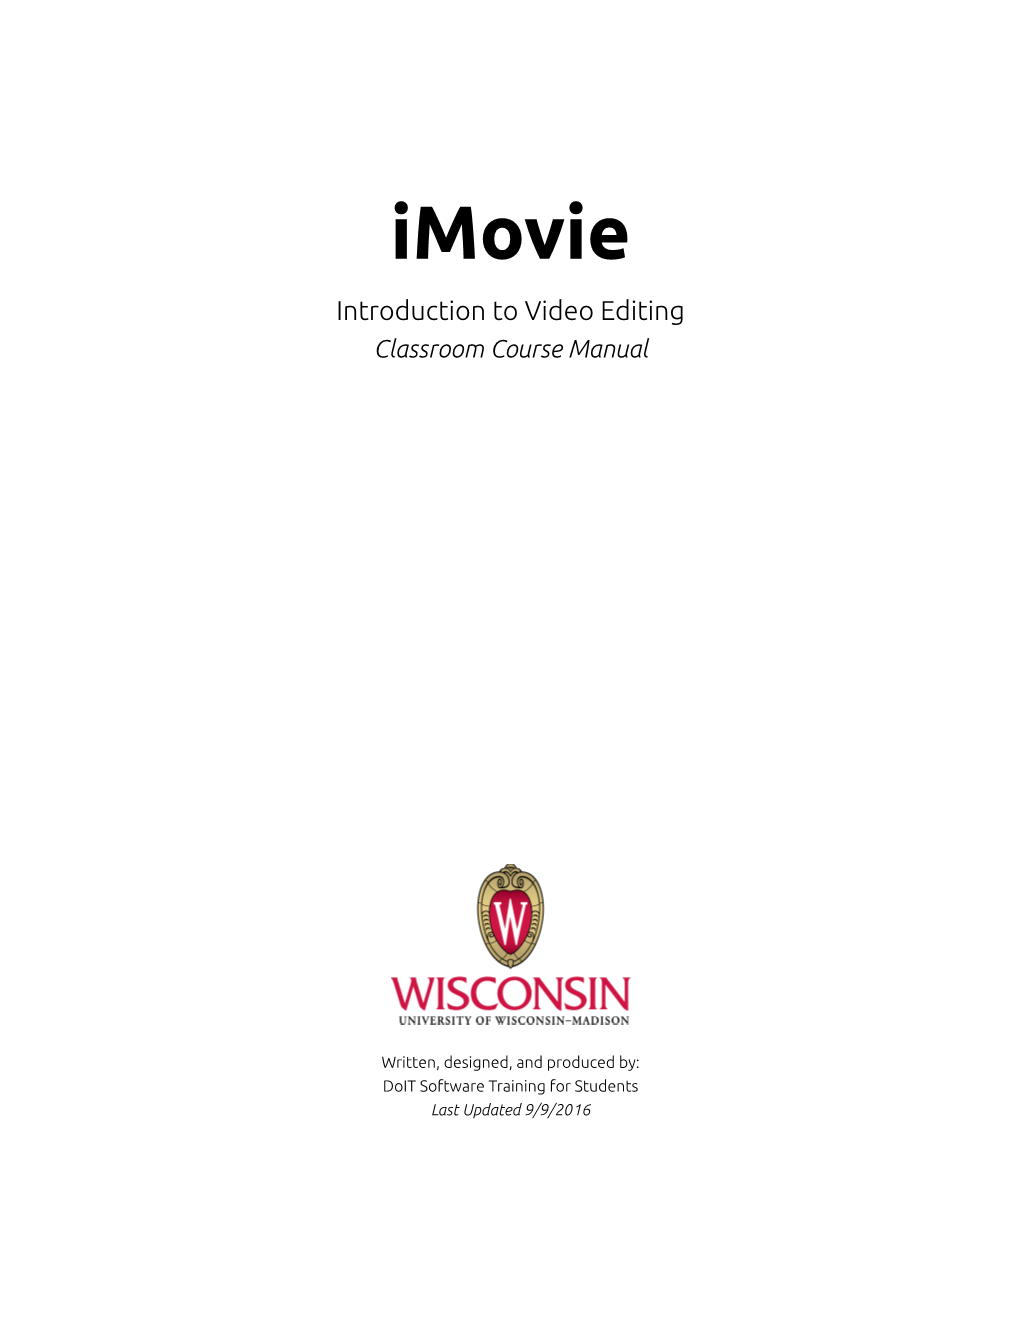 Imovie Introduction to Video Editing Classroom Course Manual